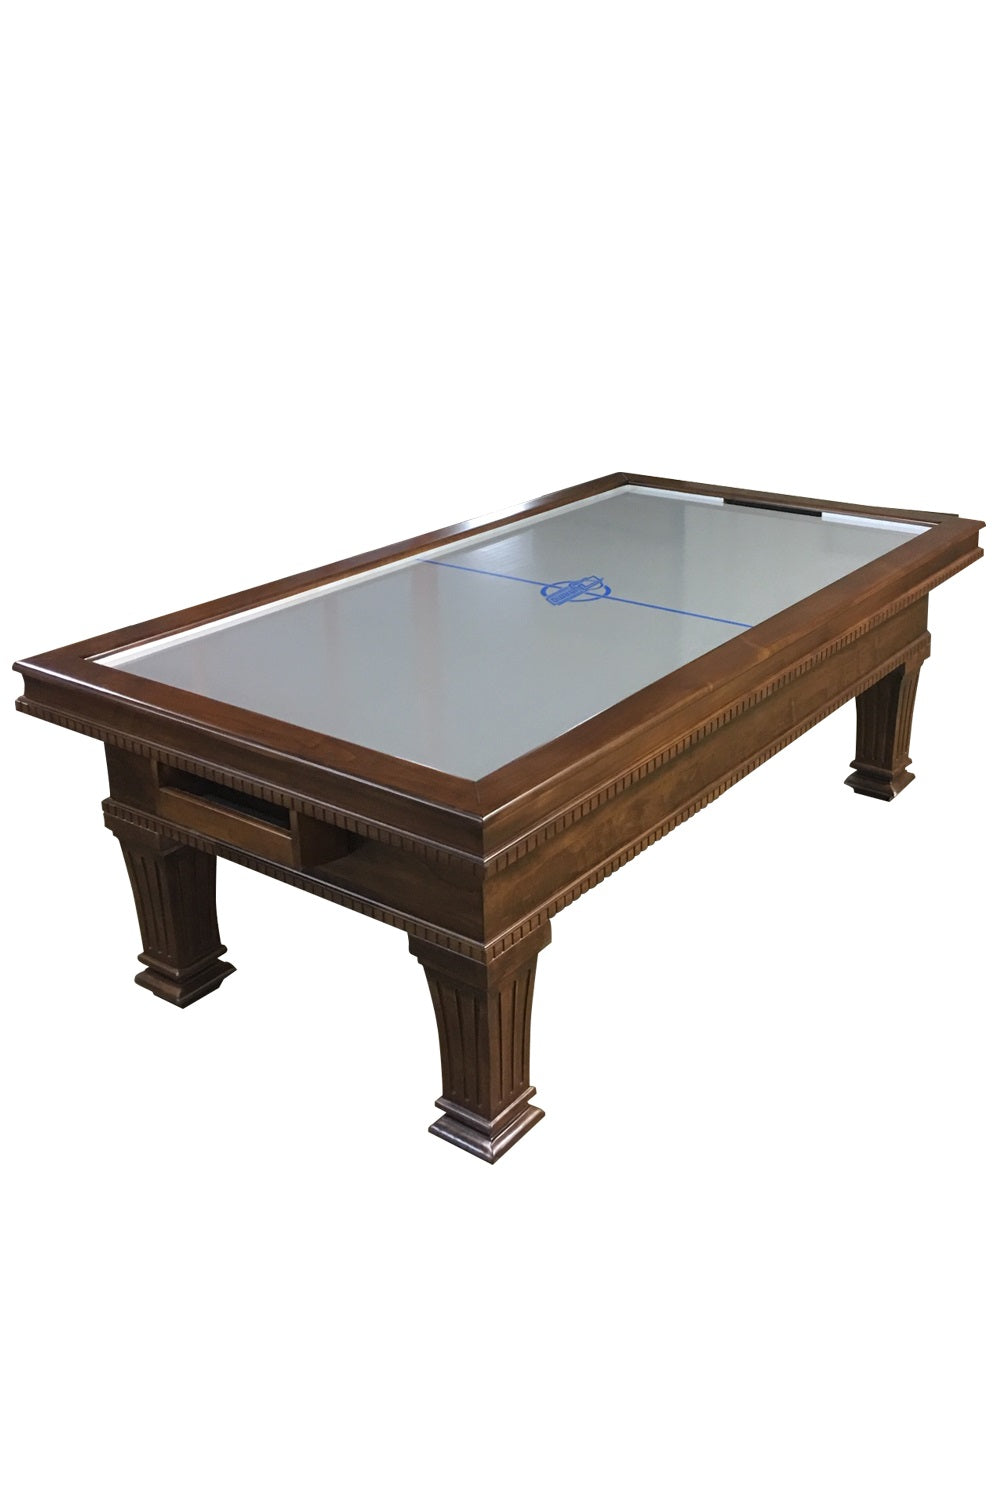 Picture of Dynamo 7' Reagan Air Hockey Table